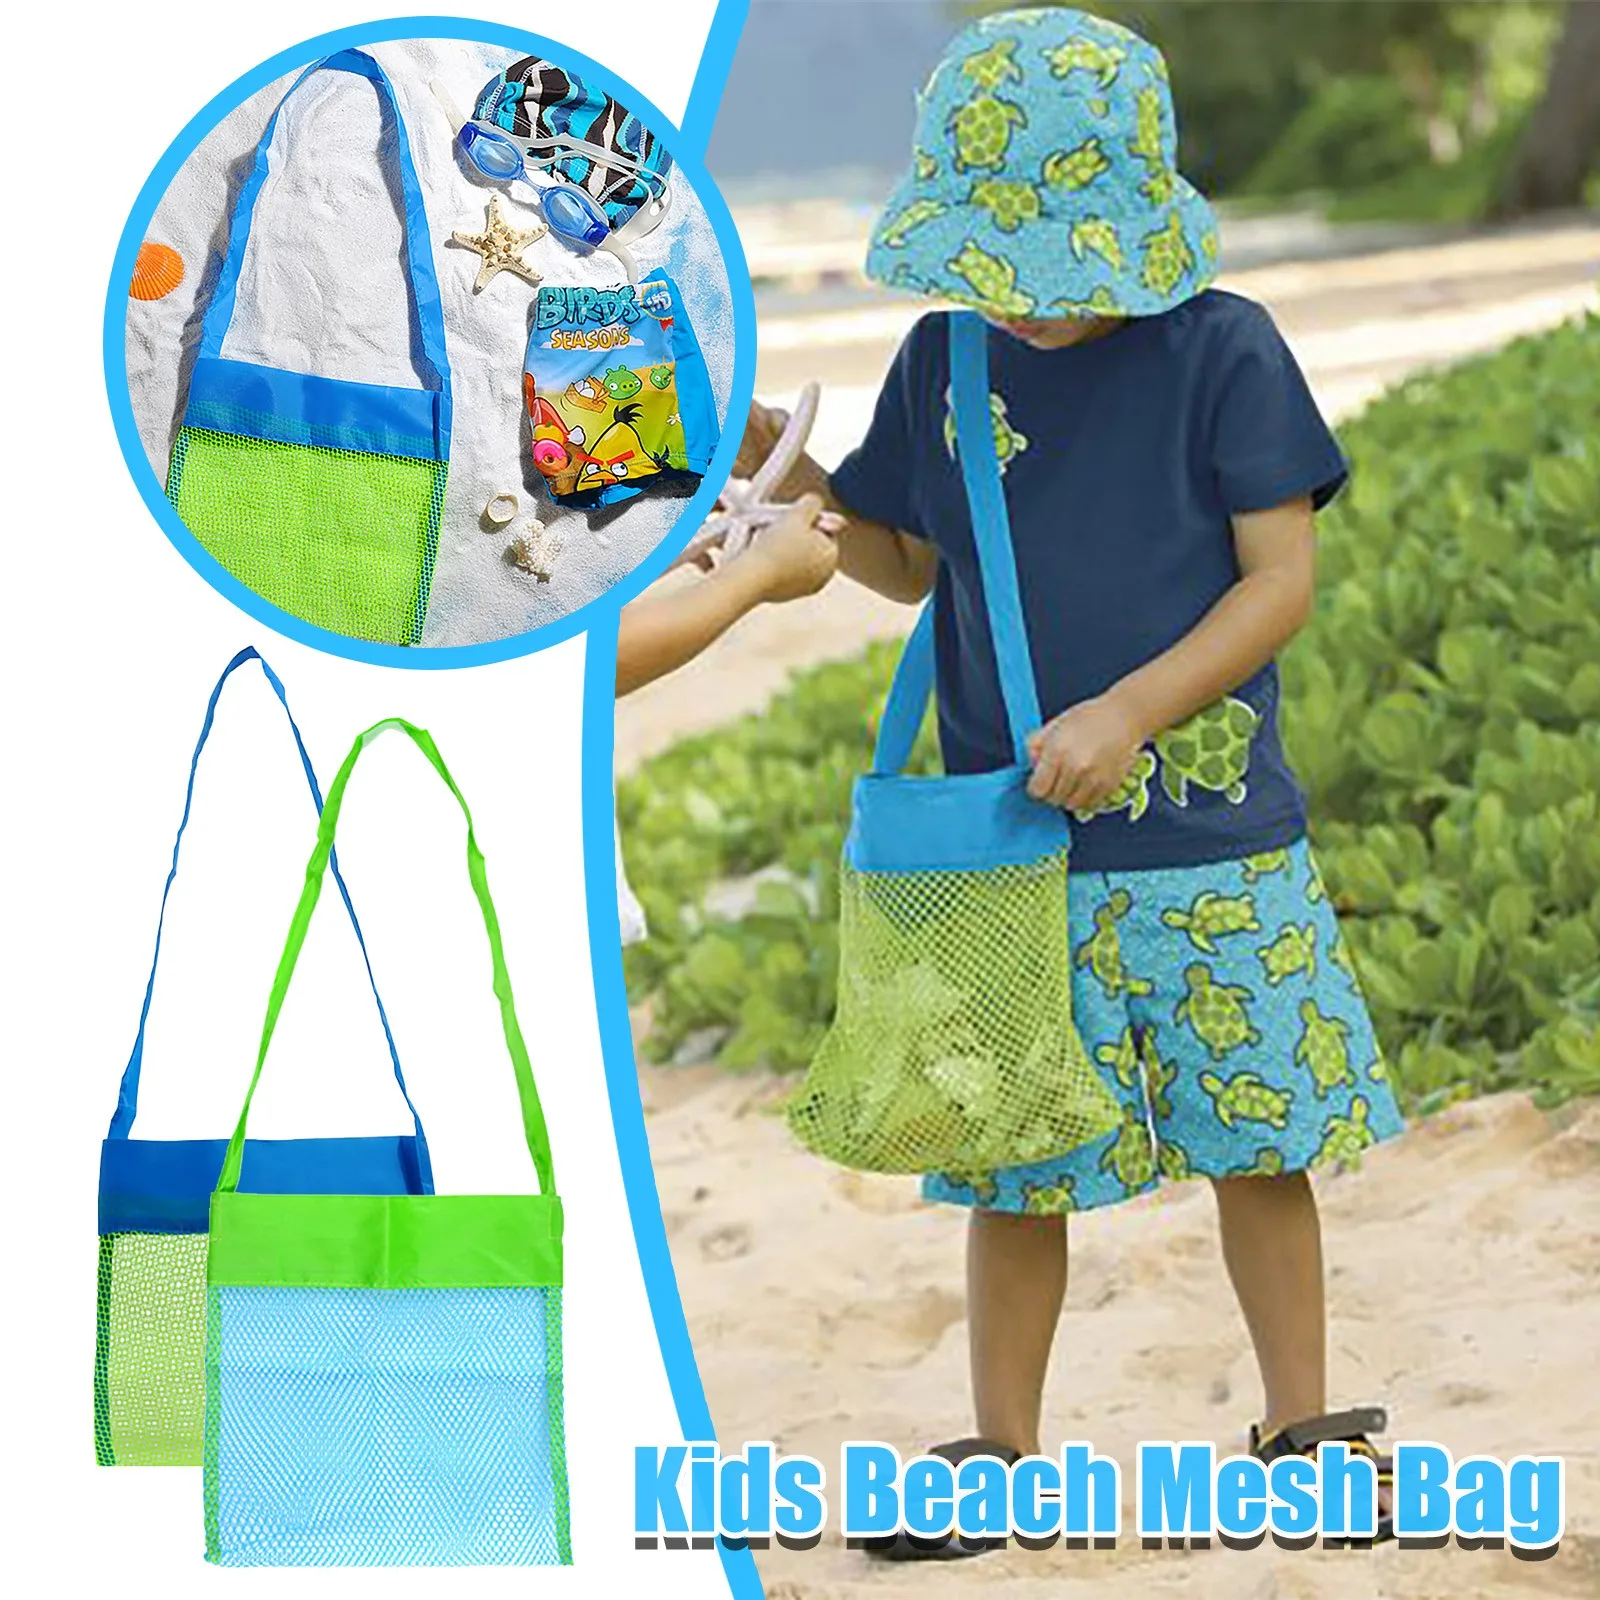 

Mesh Beach Bag Tote Backpack Toys Towels Sand Away Kids Market Grocery Picnic Foldable Storage Seashell Clothes Toys Carry Away